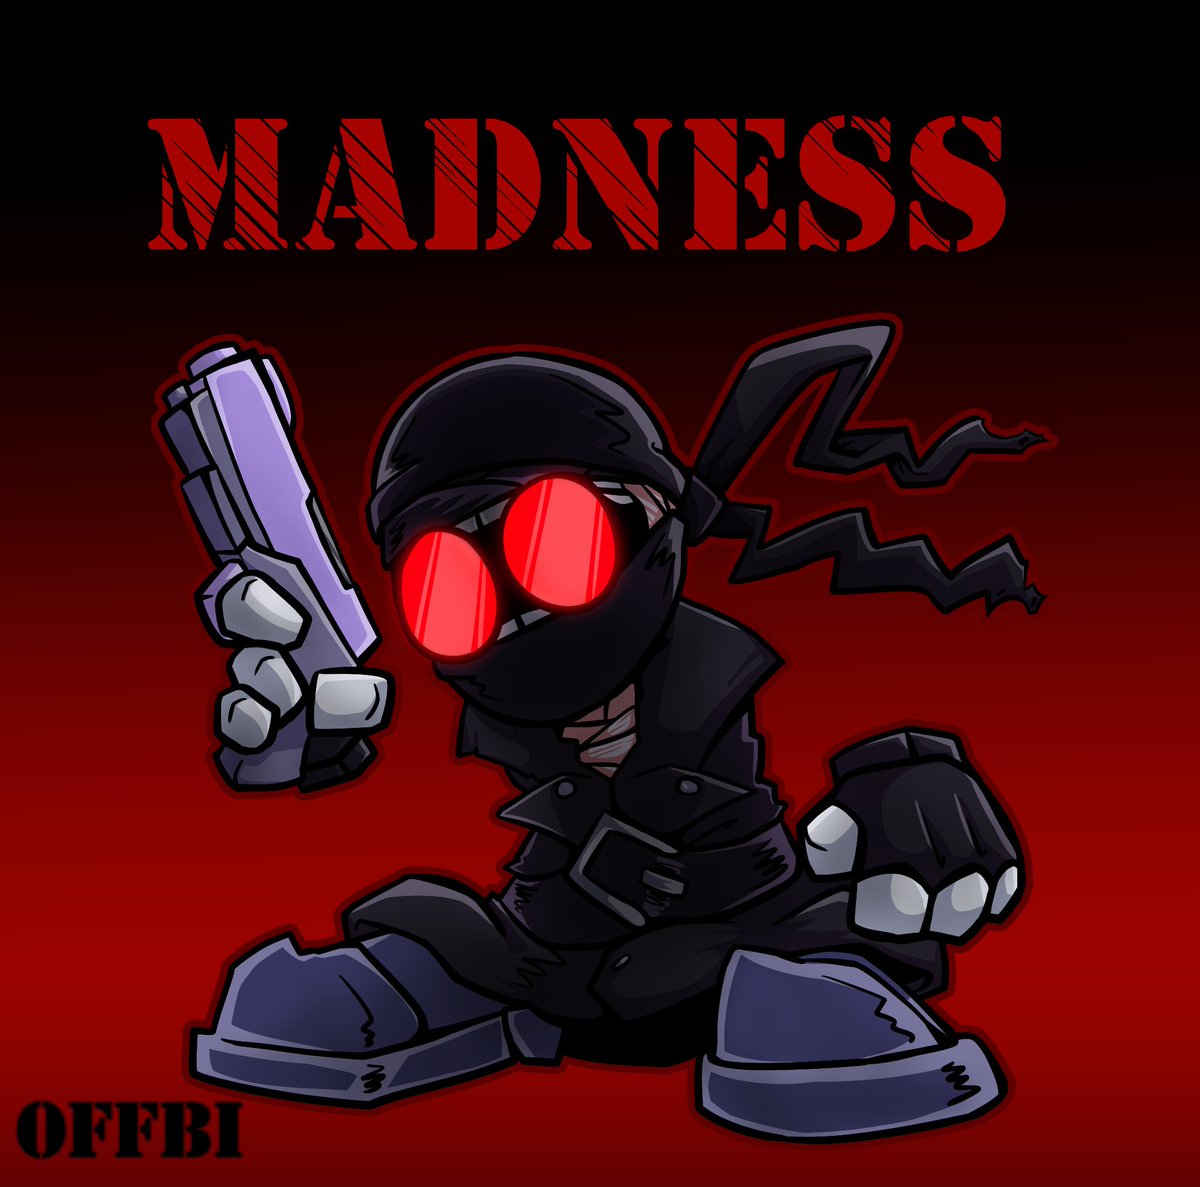 Did a lil somethin for today after a lil teasing from both FNF and Project Nexus dev teams lel
#madnesscombat #projectnexus